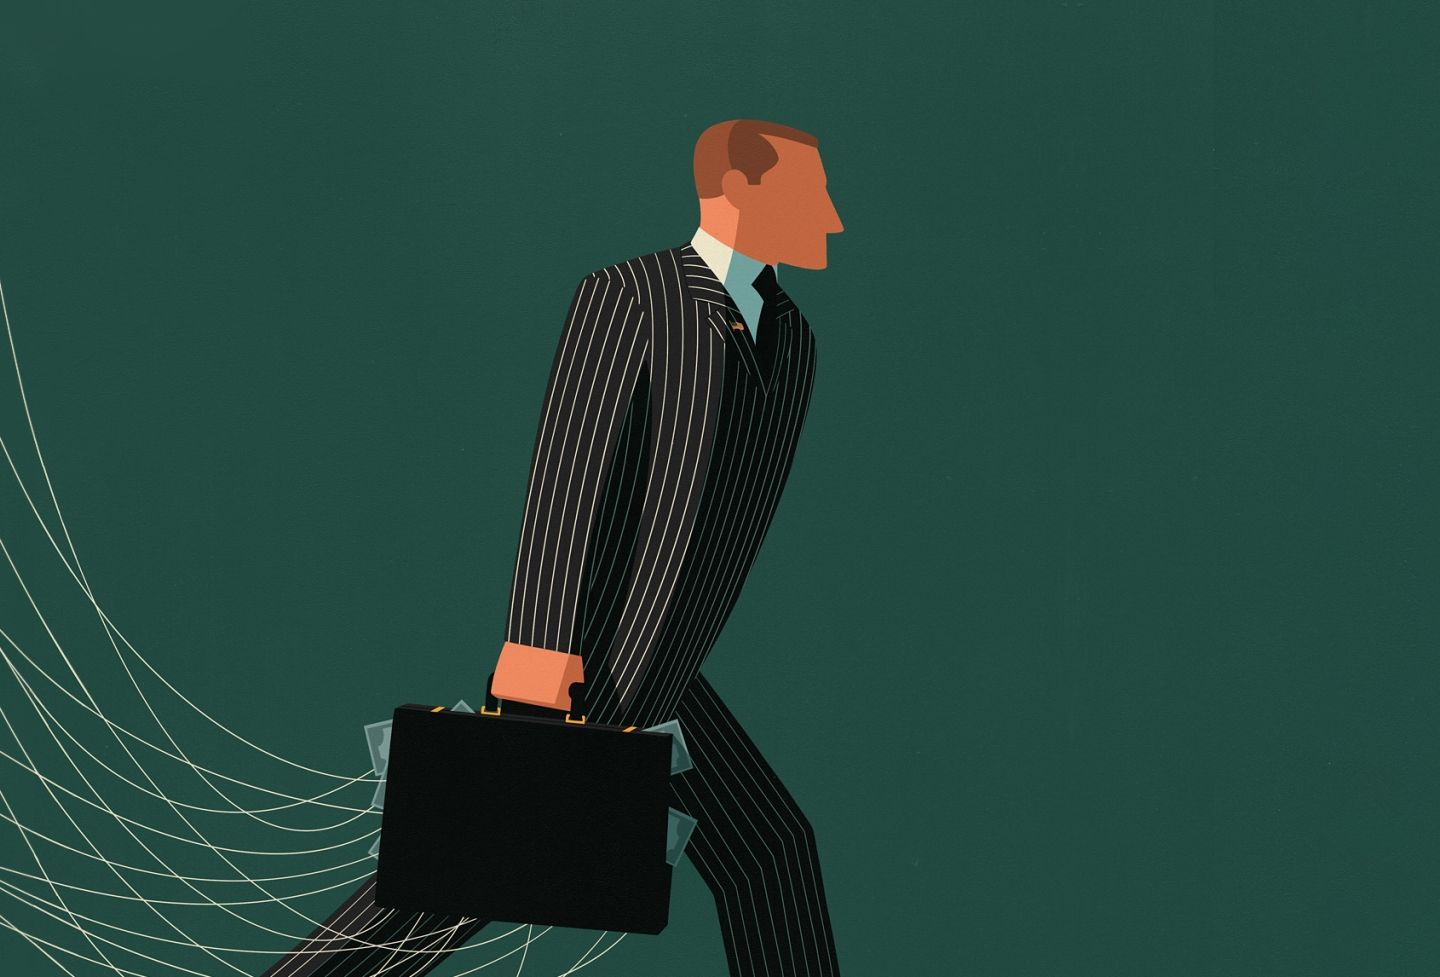 Illustration of a man holding a suitcase with strings coming out of it.